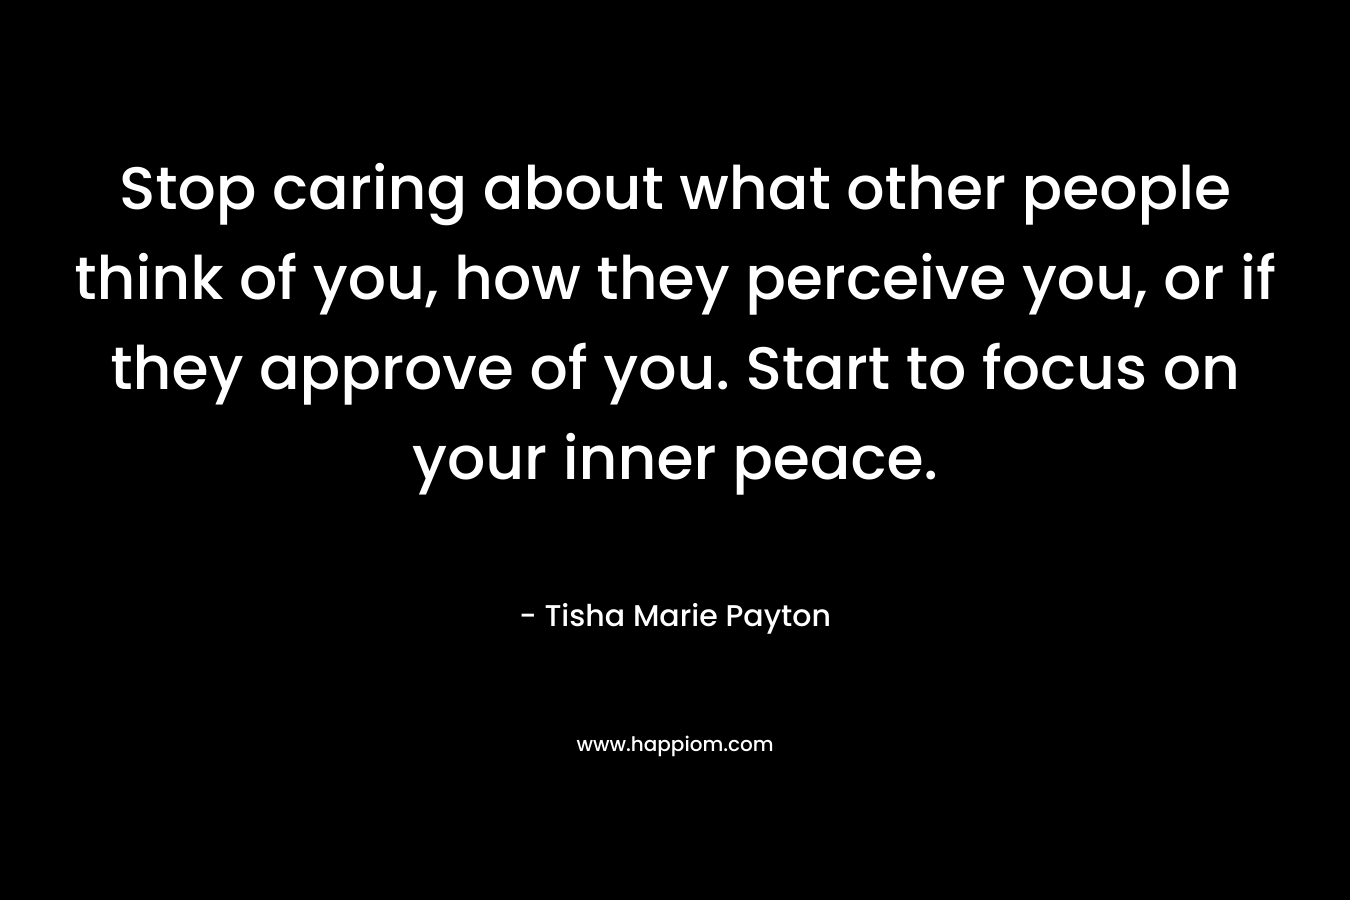 Stop caring about what other people think of you, how they perceive you, or if they approve of you. Start to focus on your inner peace.